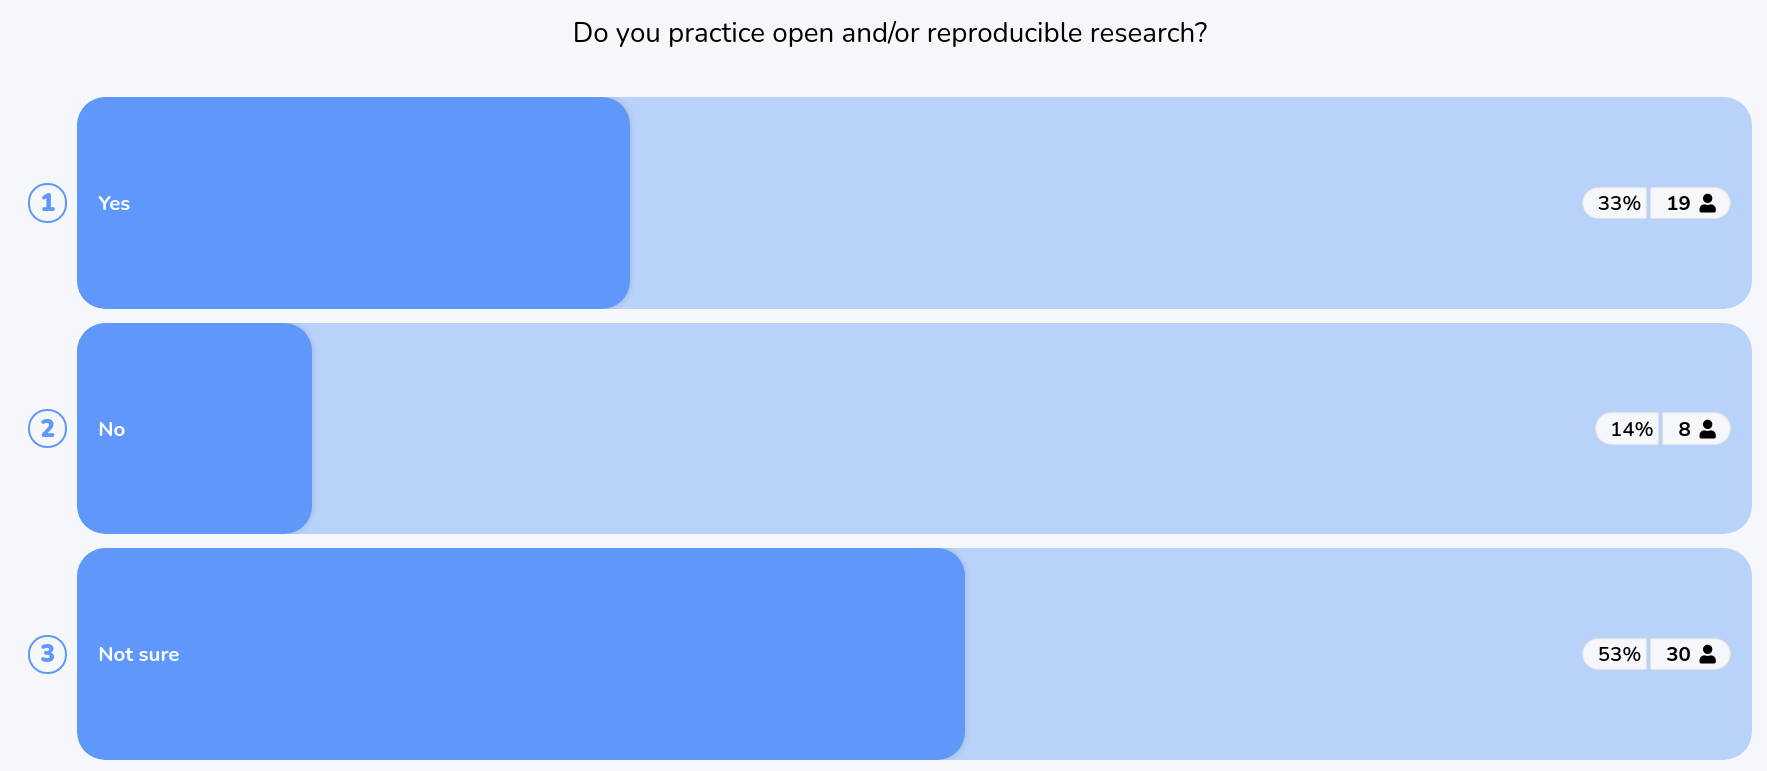 Do you practice open and/or reproducible research?